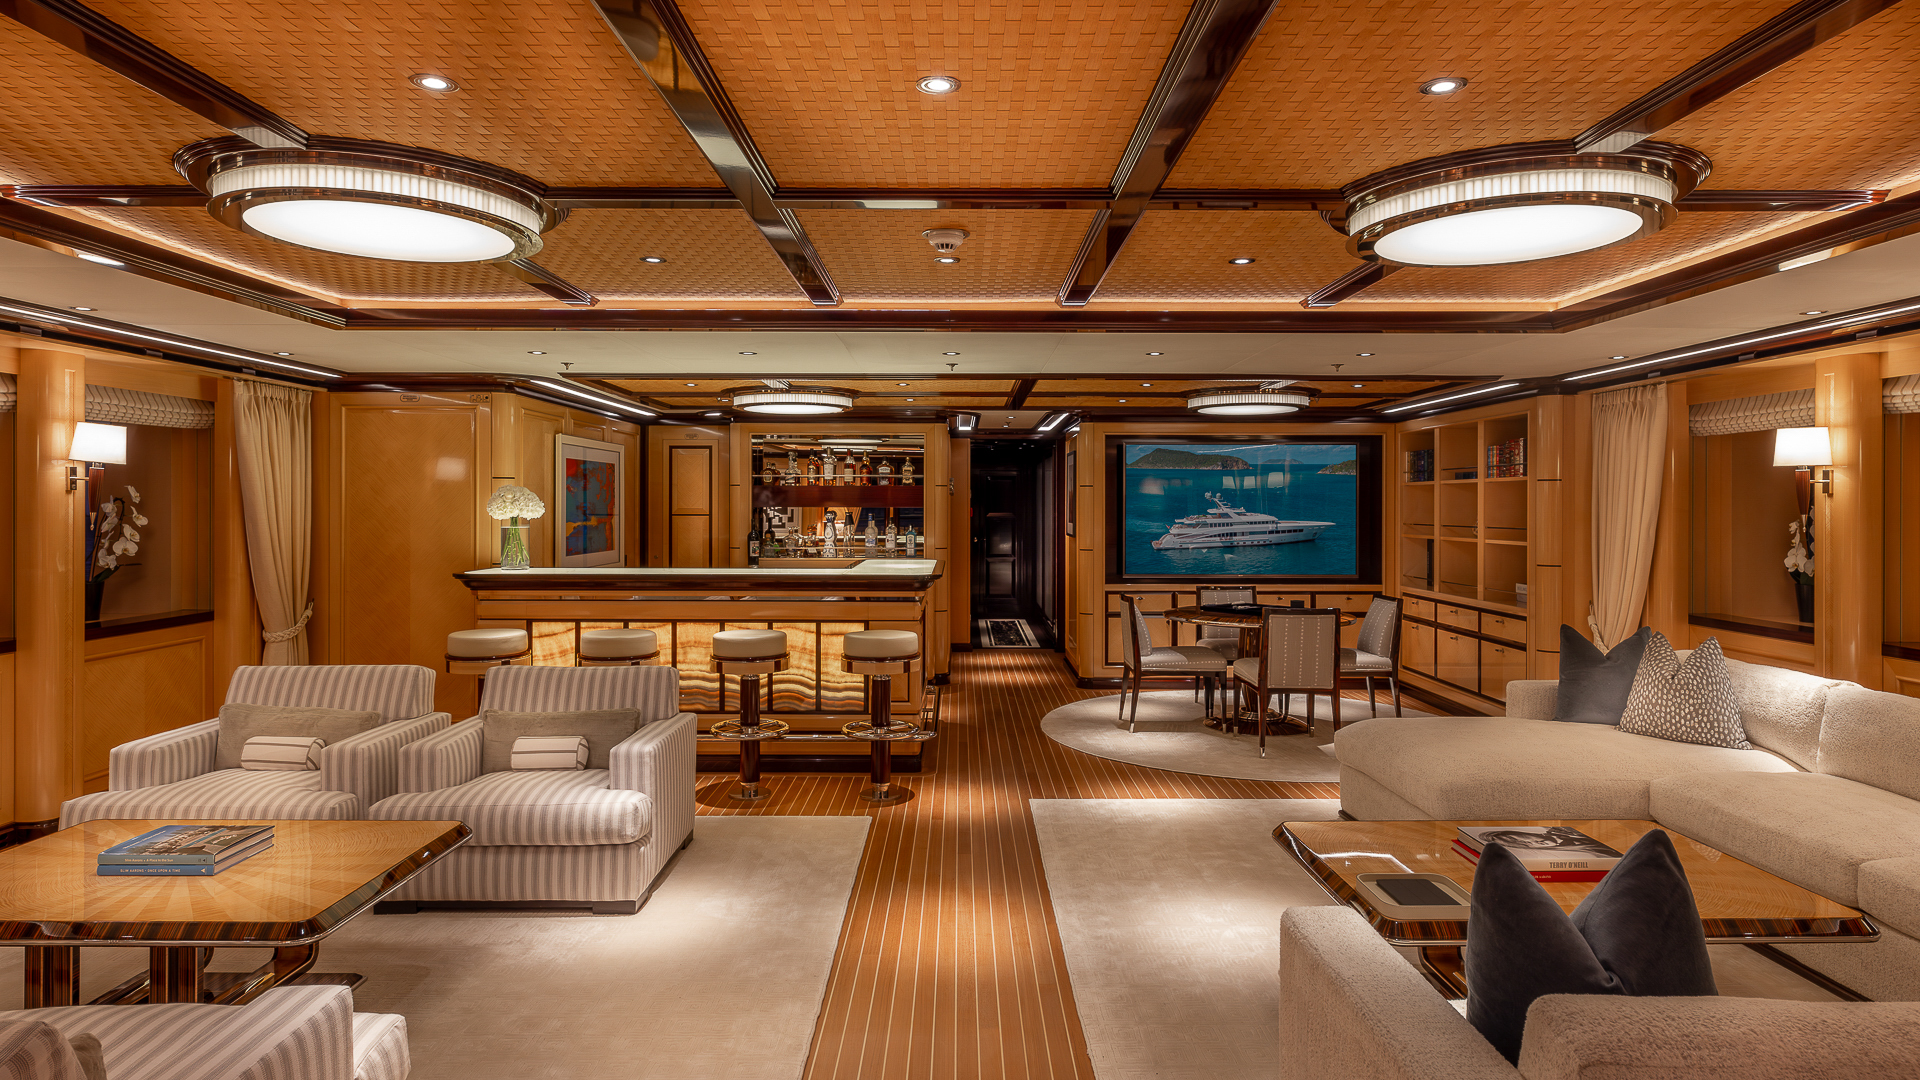 Rock It Upper Deck -  Bar And Seating Area Skylounge Looking Forward Credit Yachting Image